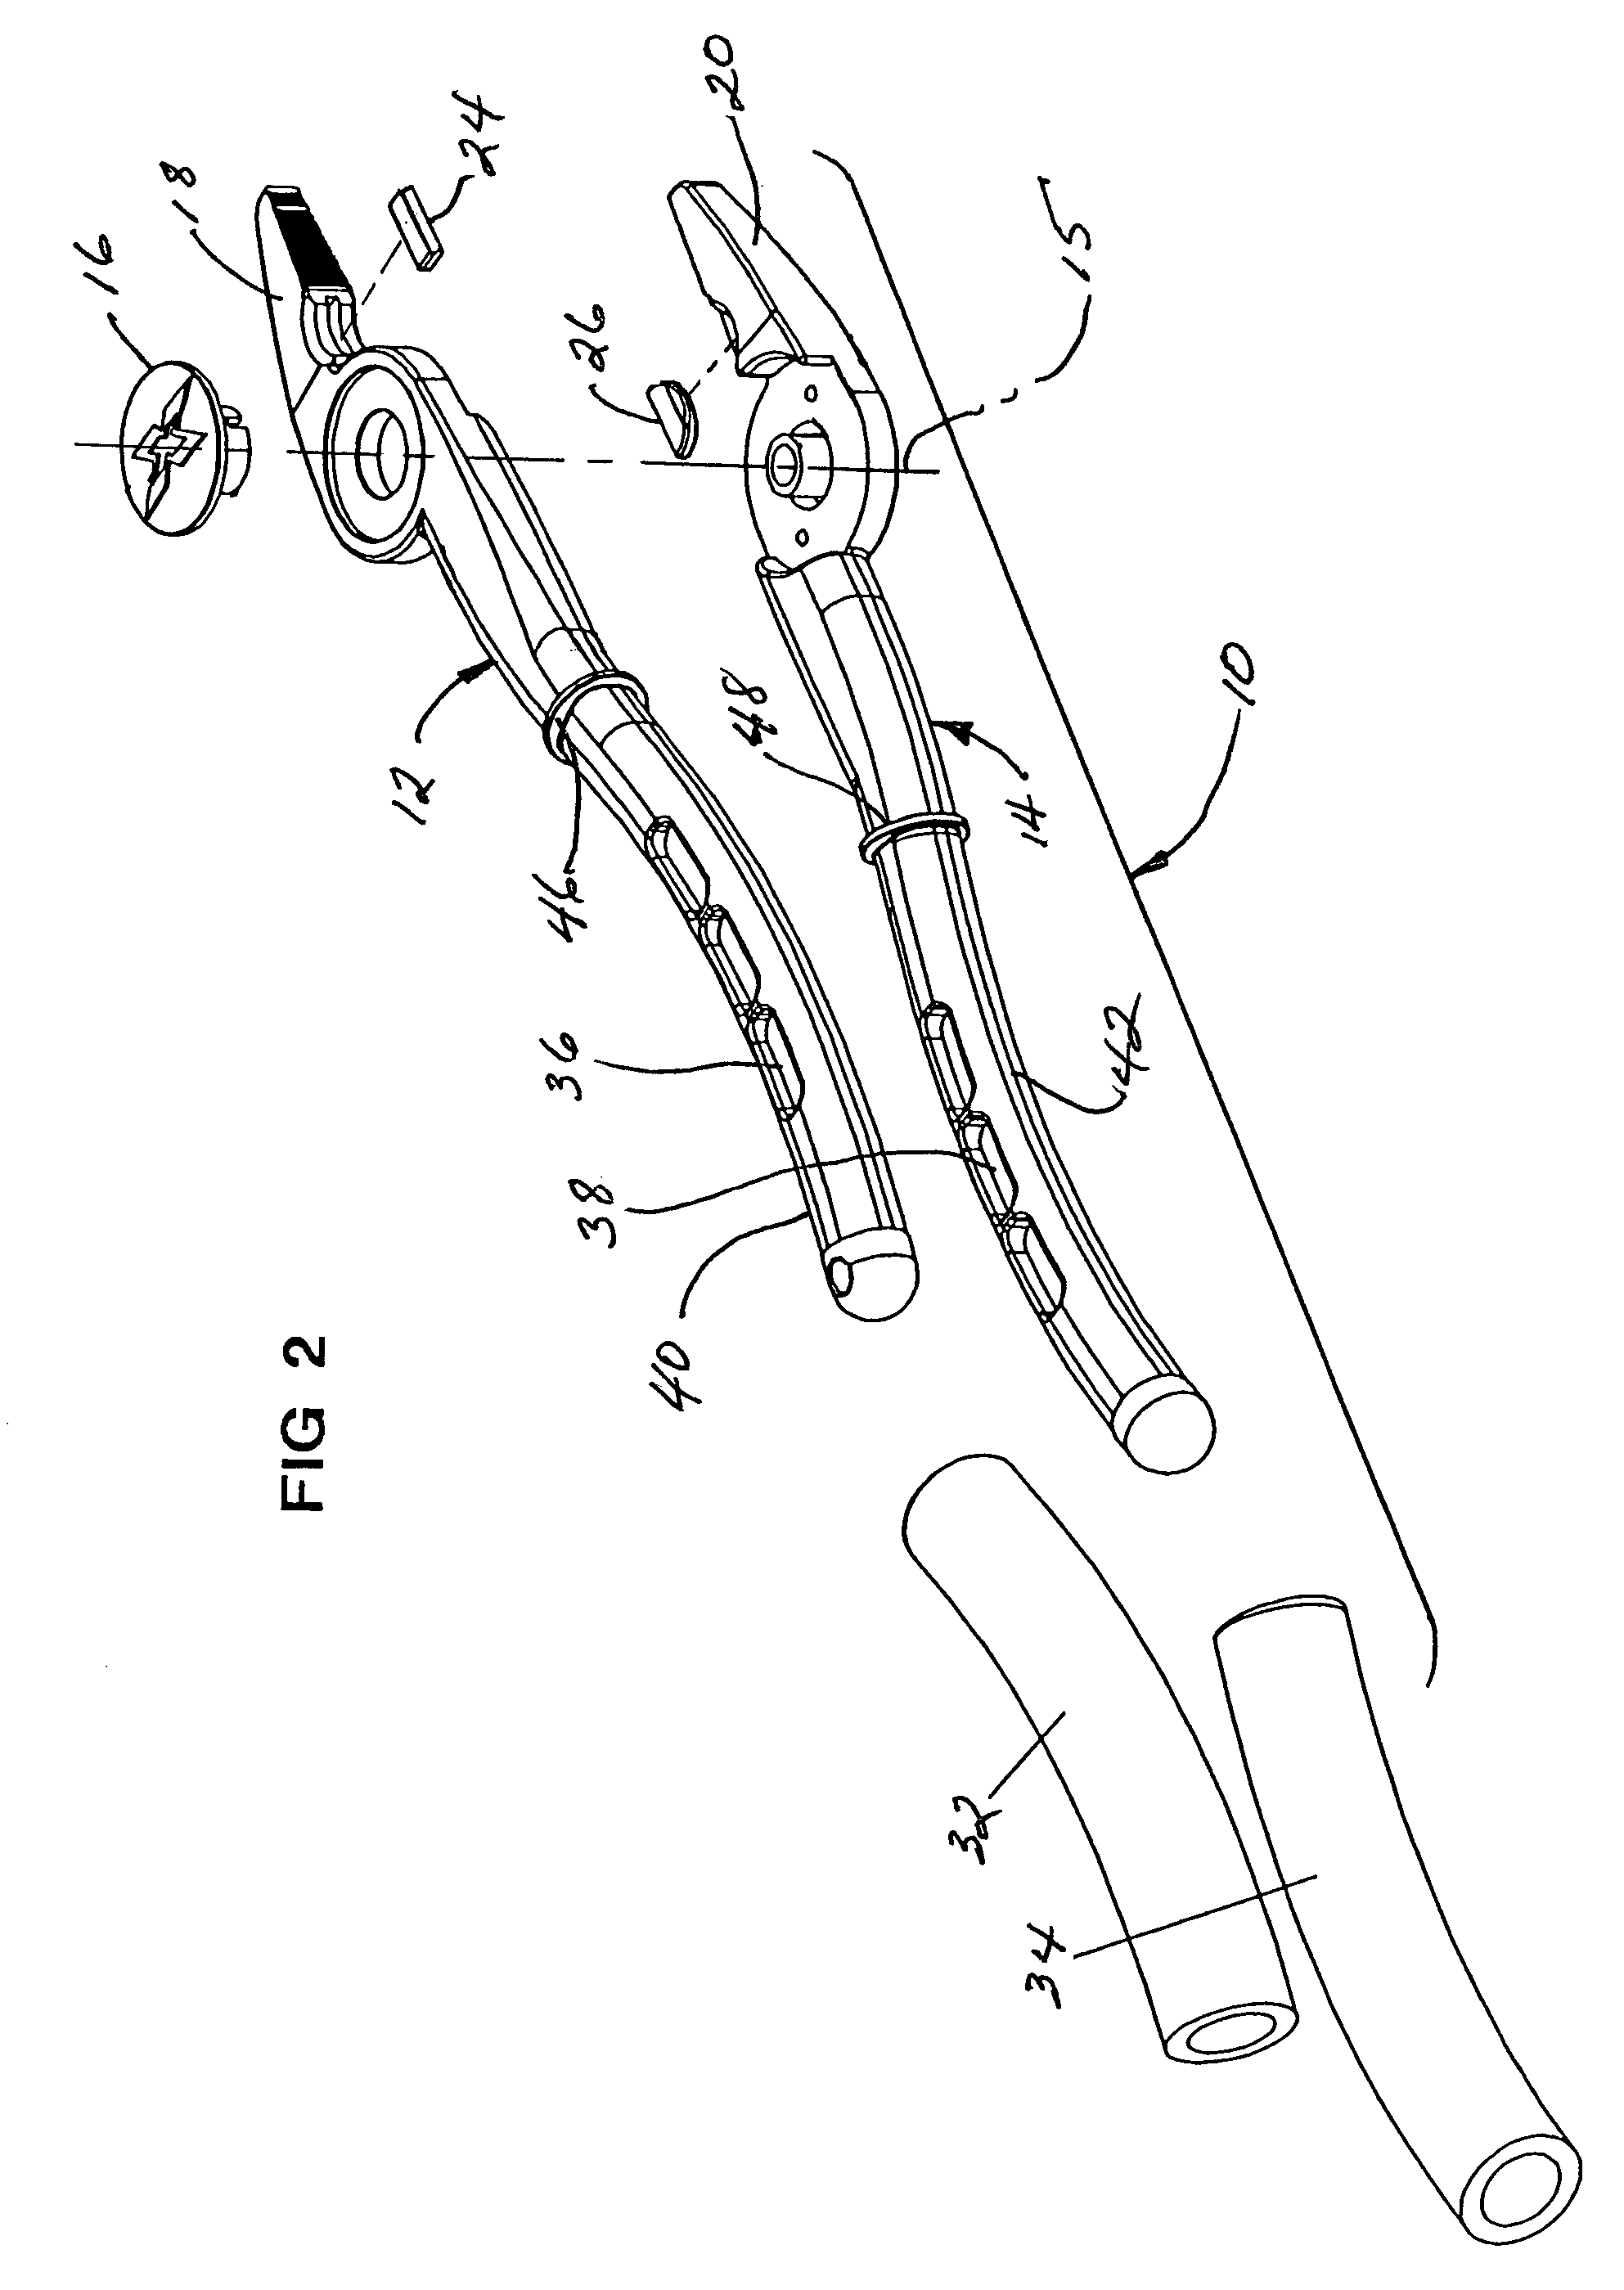 Non-metallic hand pliers with wire cutter